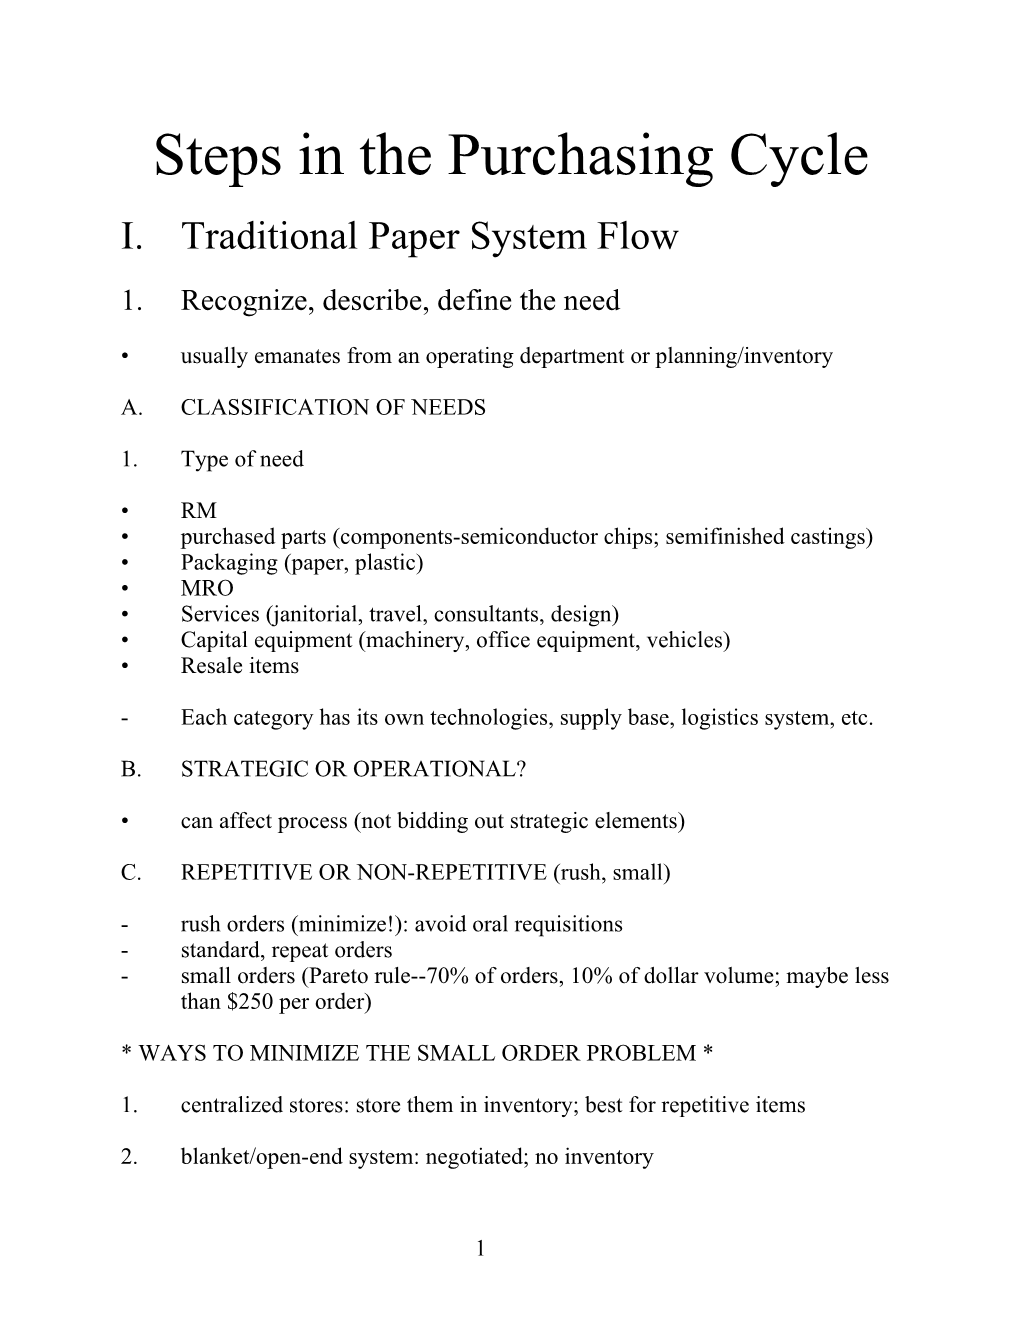 Steps in the Purchasing Cycle